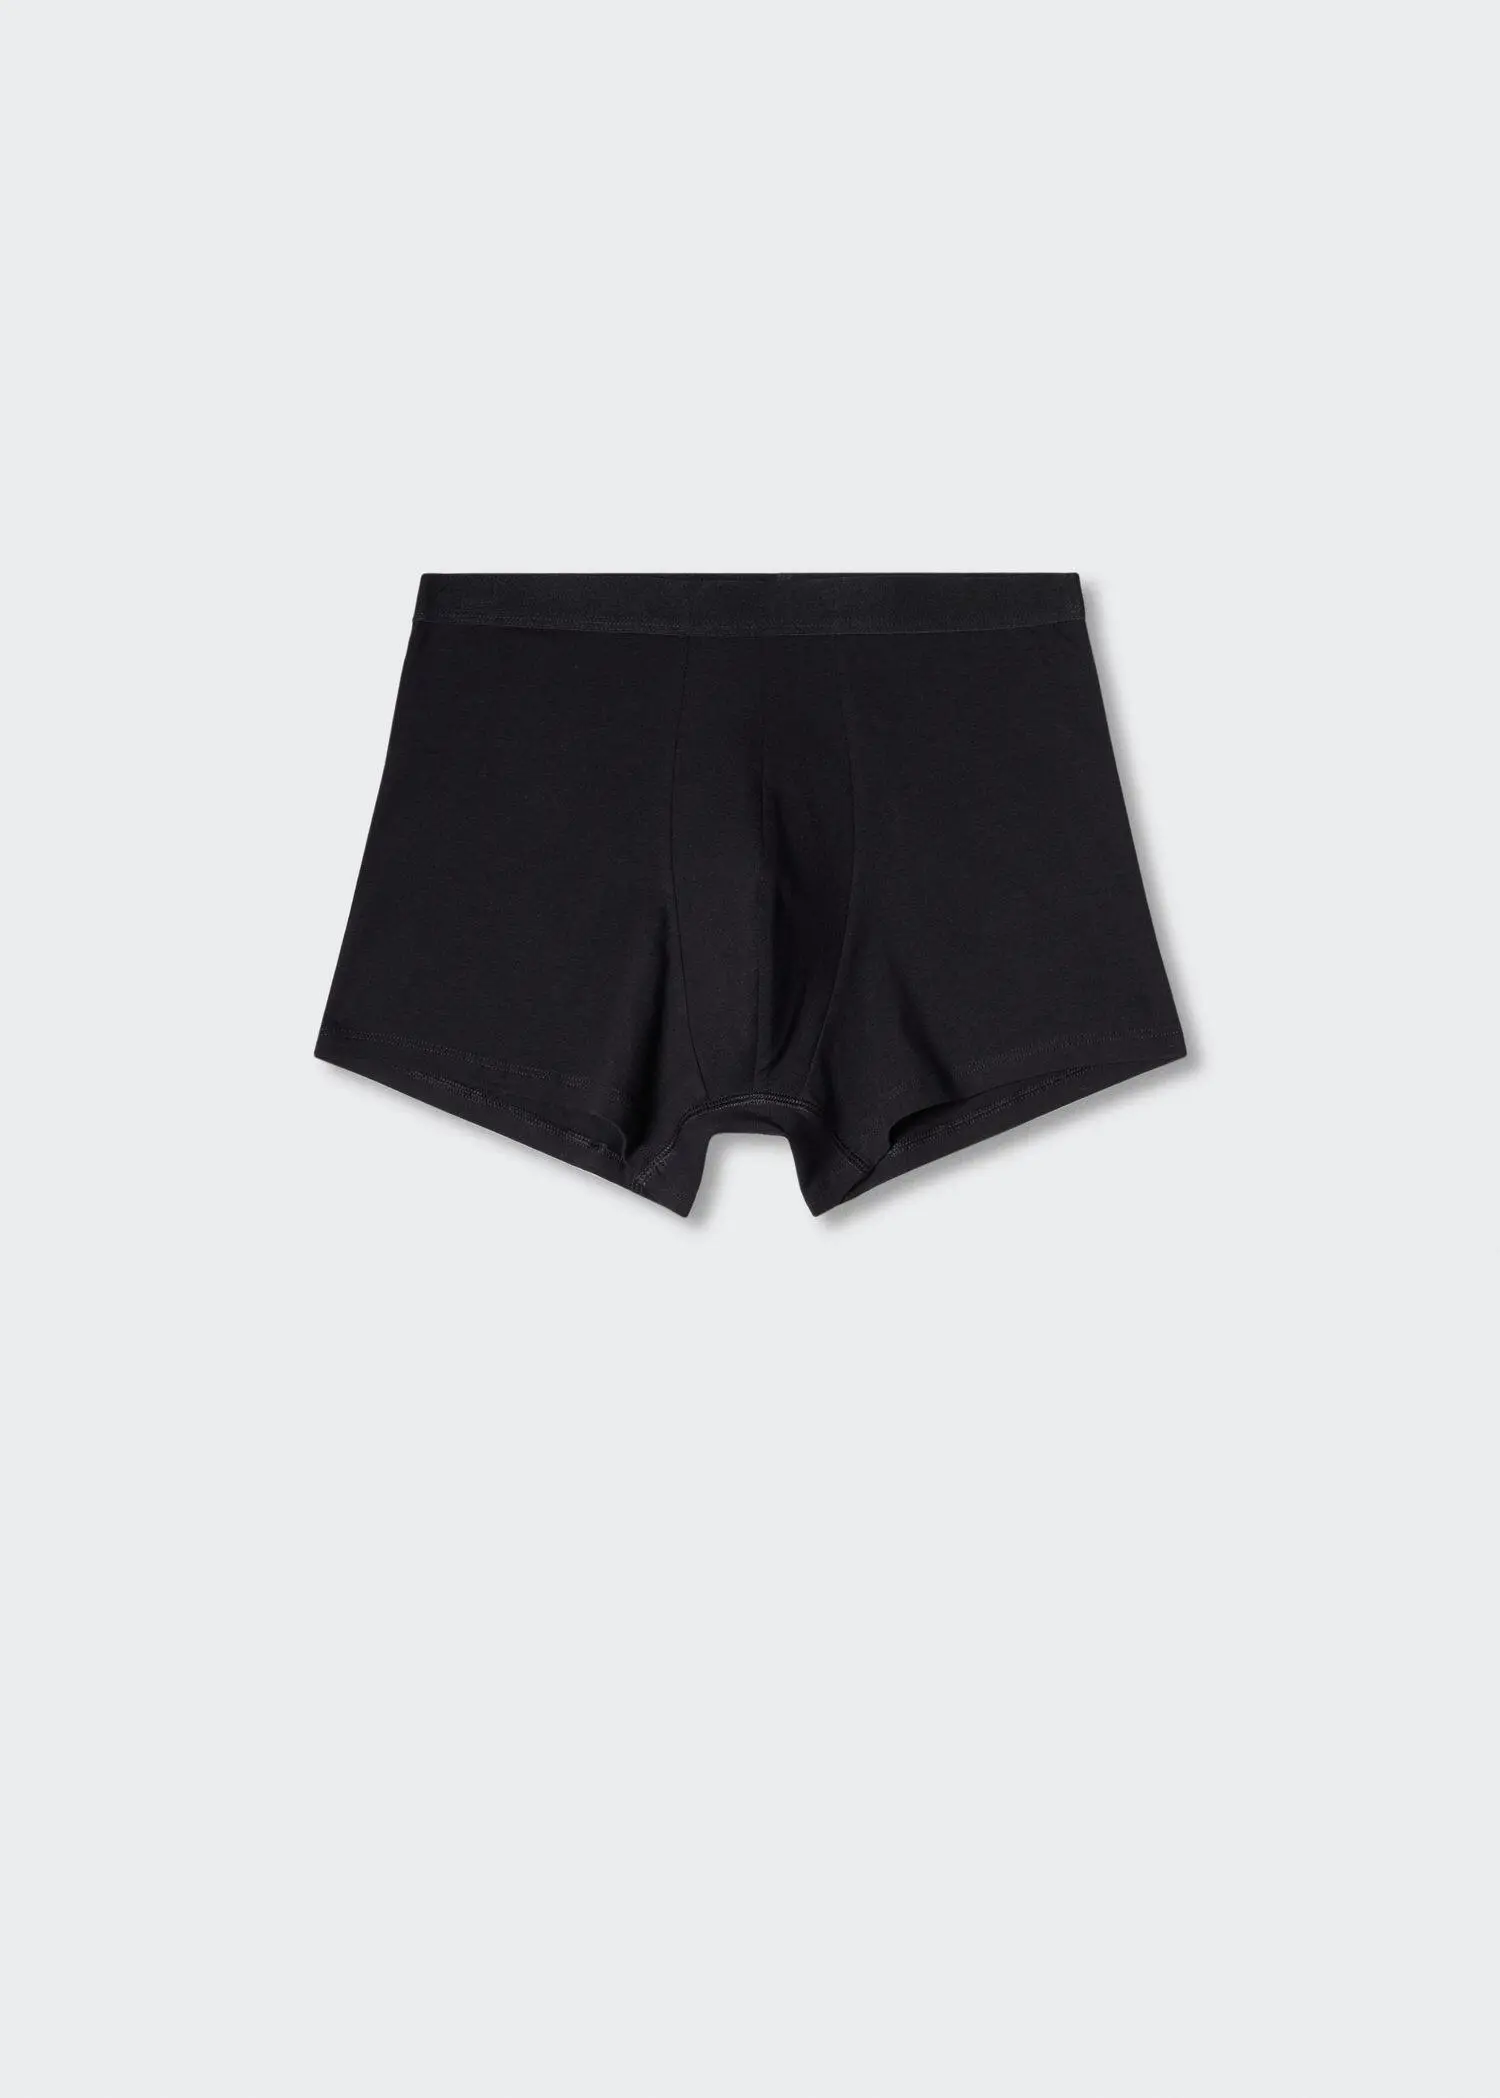 Mango 3-pack of black cotton boxer shorts. a pair of black shorts on a white background. 